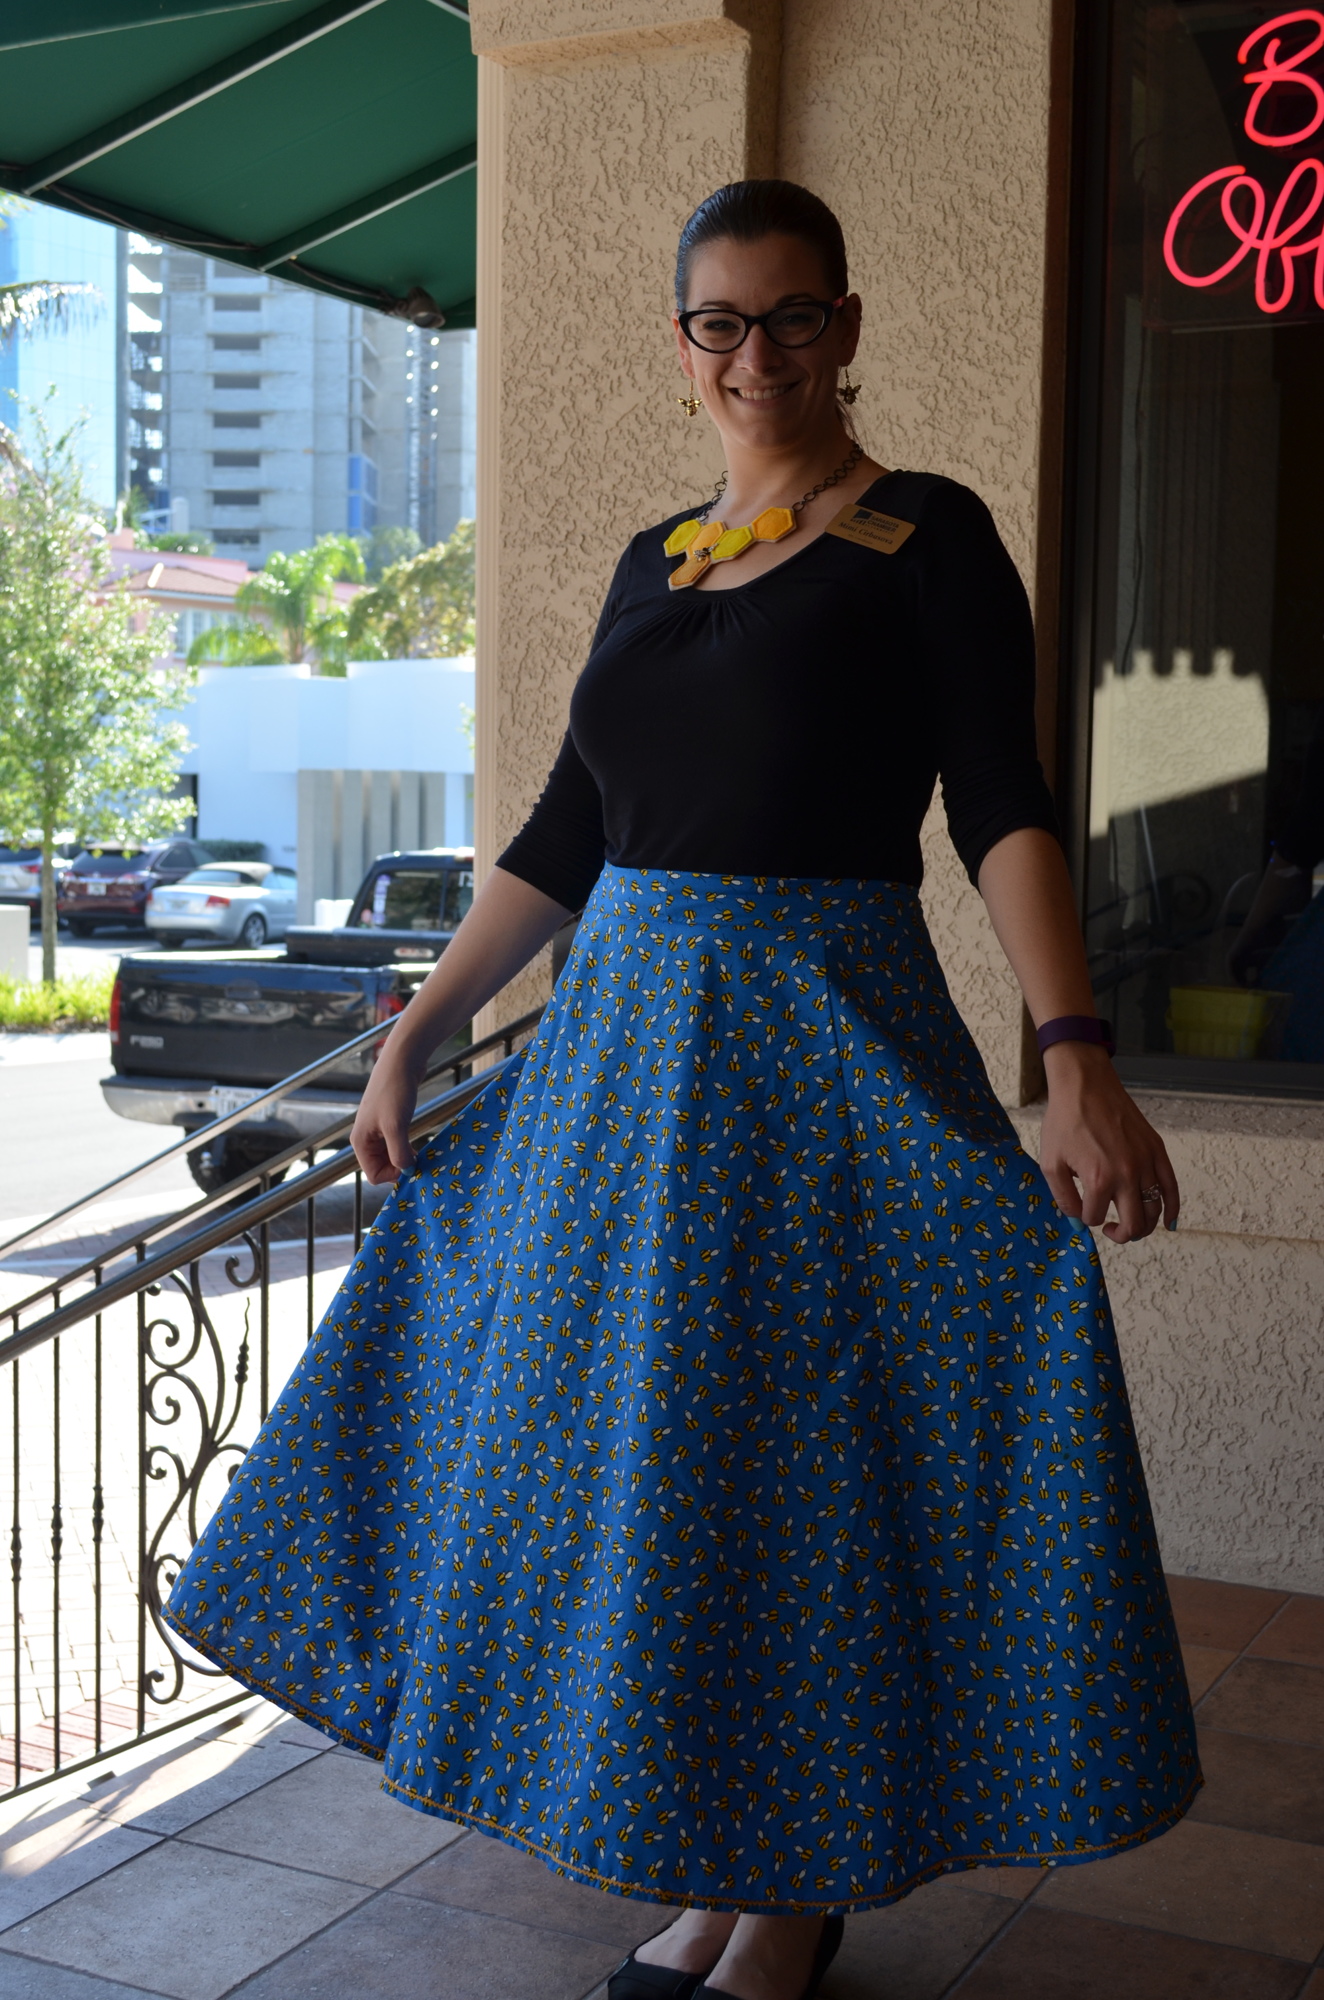 Mimi Cirbusova's  outfit for the YPG Spelling Bee included a skirt with a bee pattern, a honeycomb necklace and matching bee earrings.